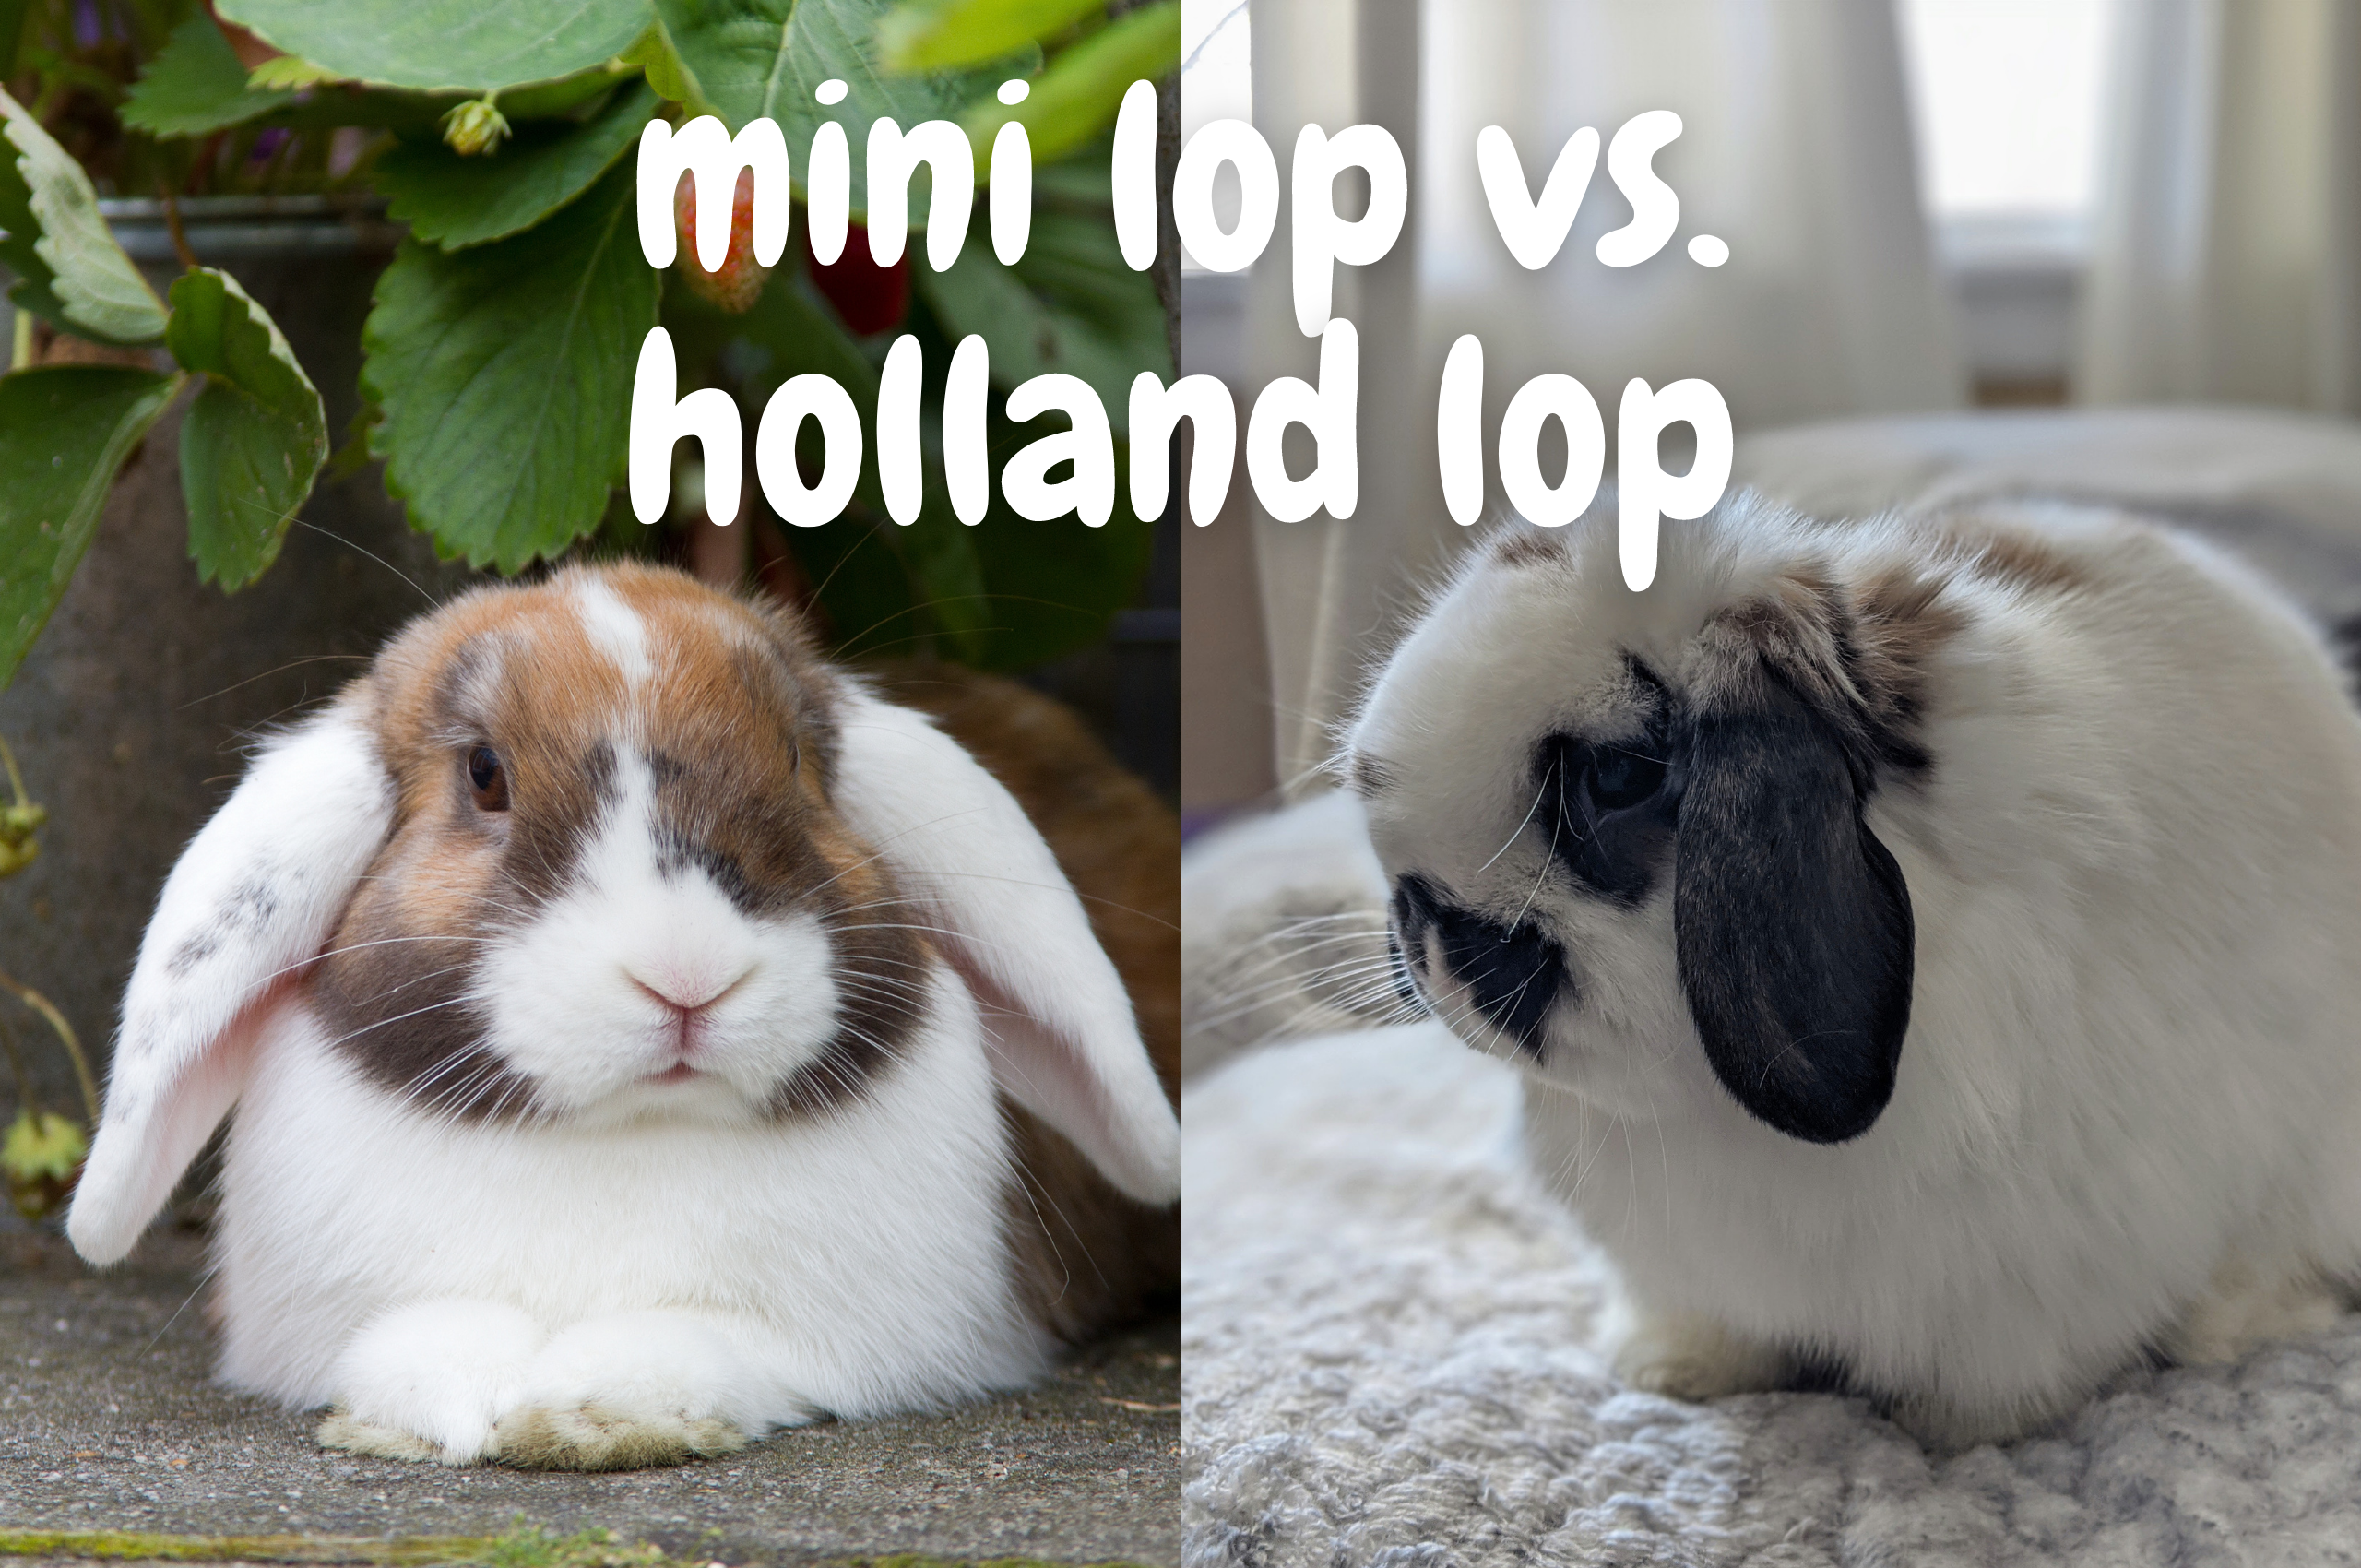 mini op and holland lop side by side comparison